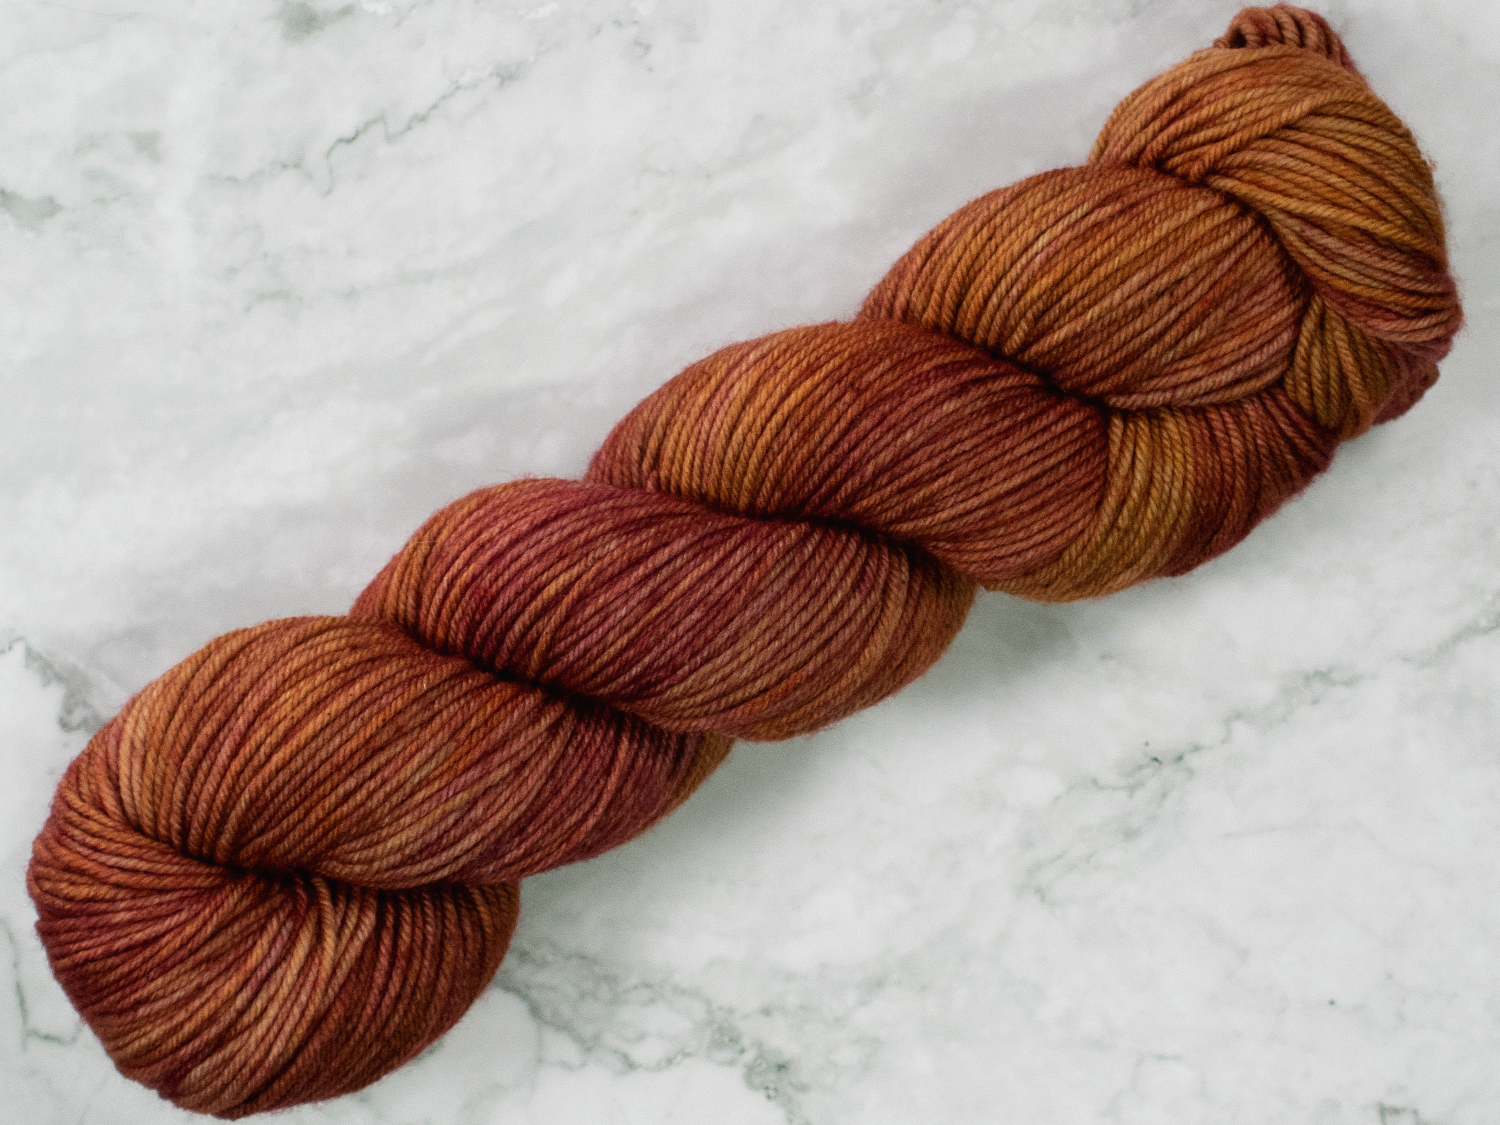 Photo of DK Weight yarn in "Tea Time of the Soul"